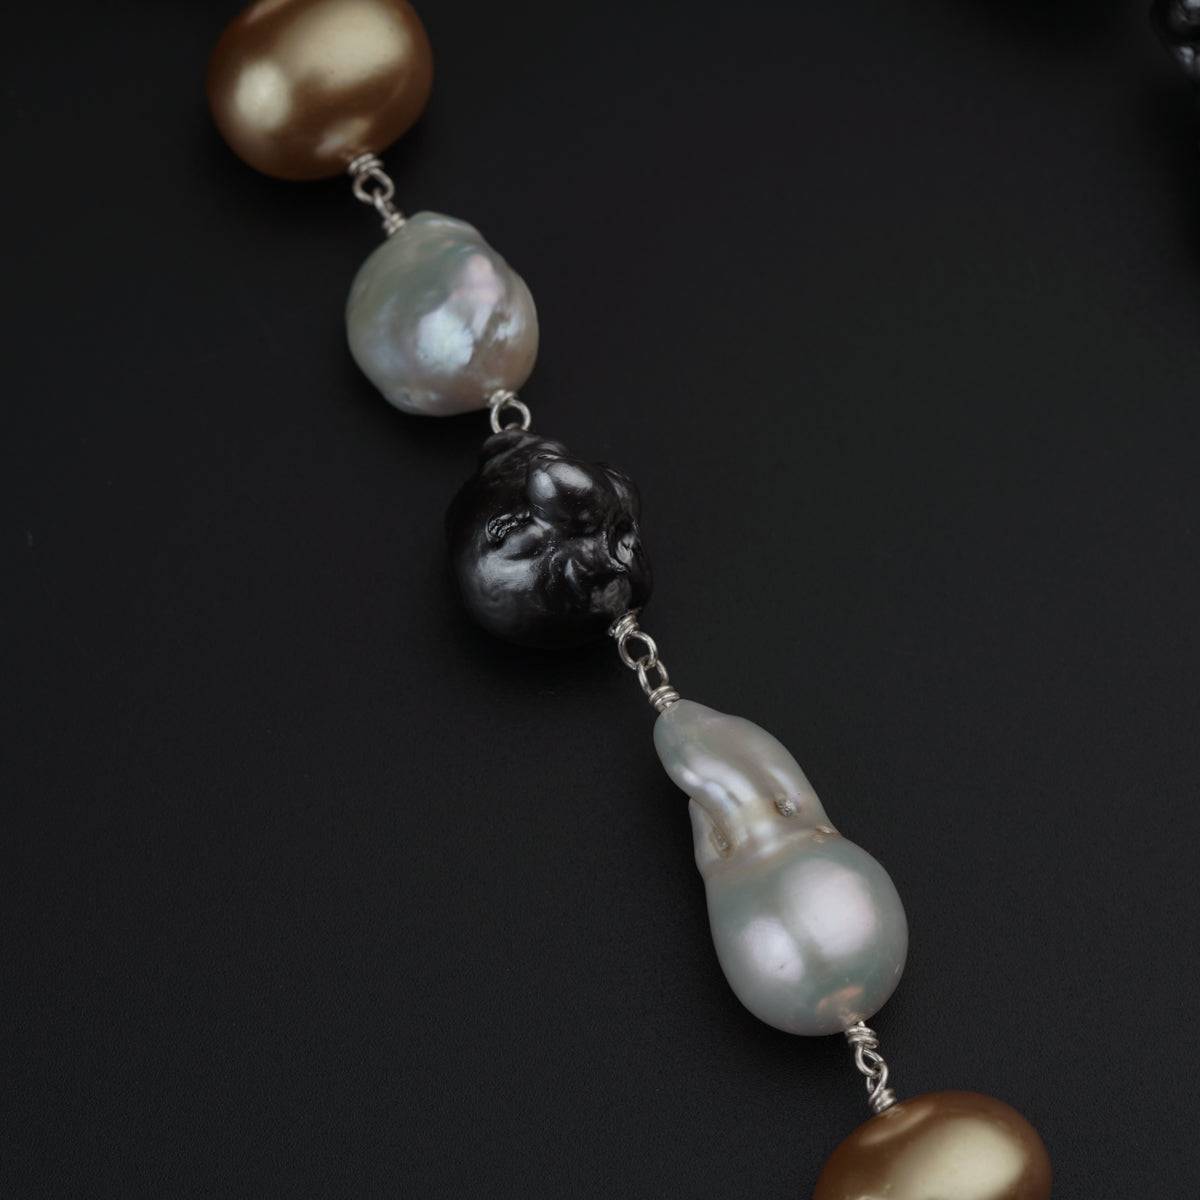 a black and white necklace with pearls on it